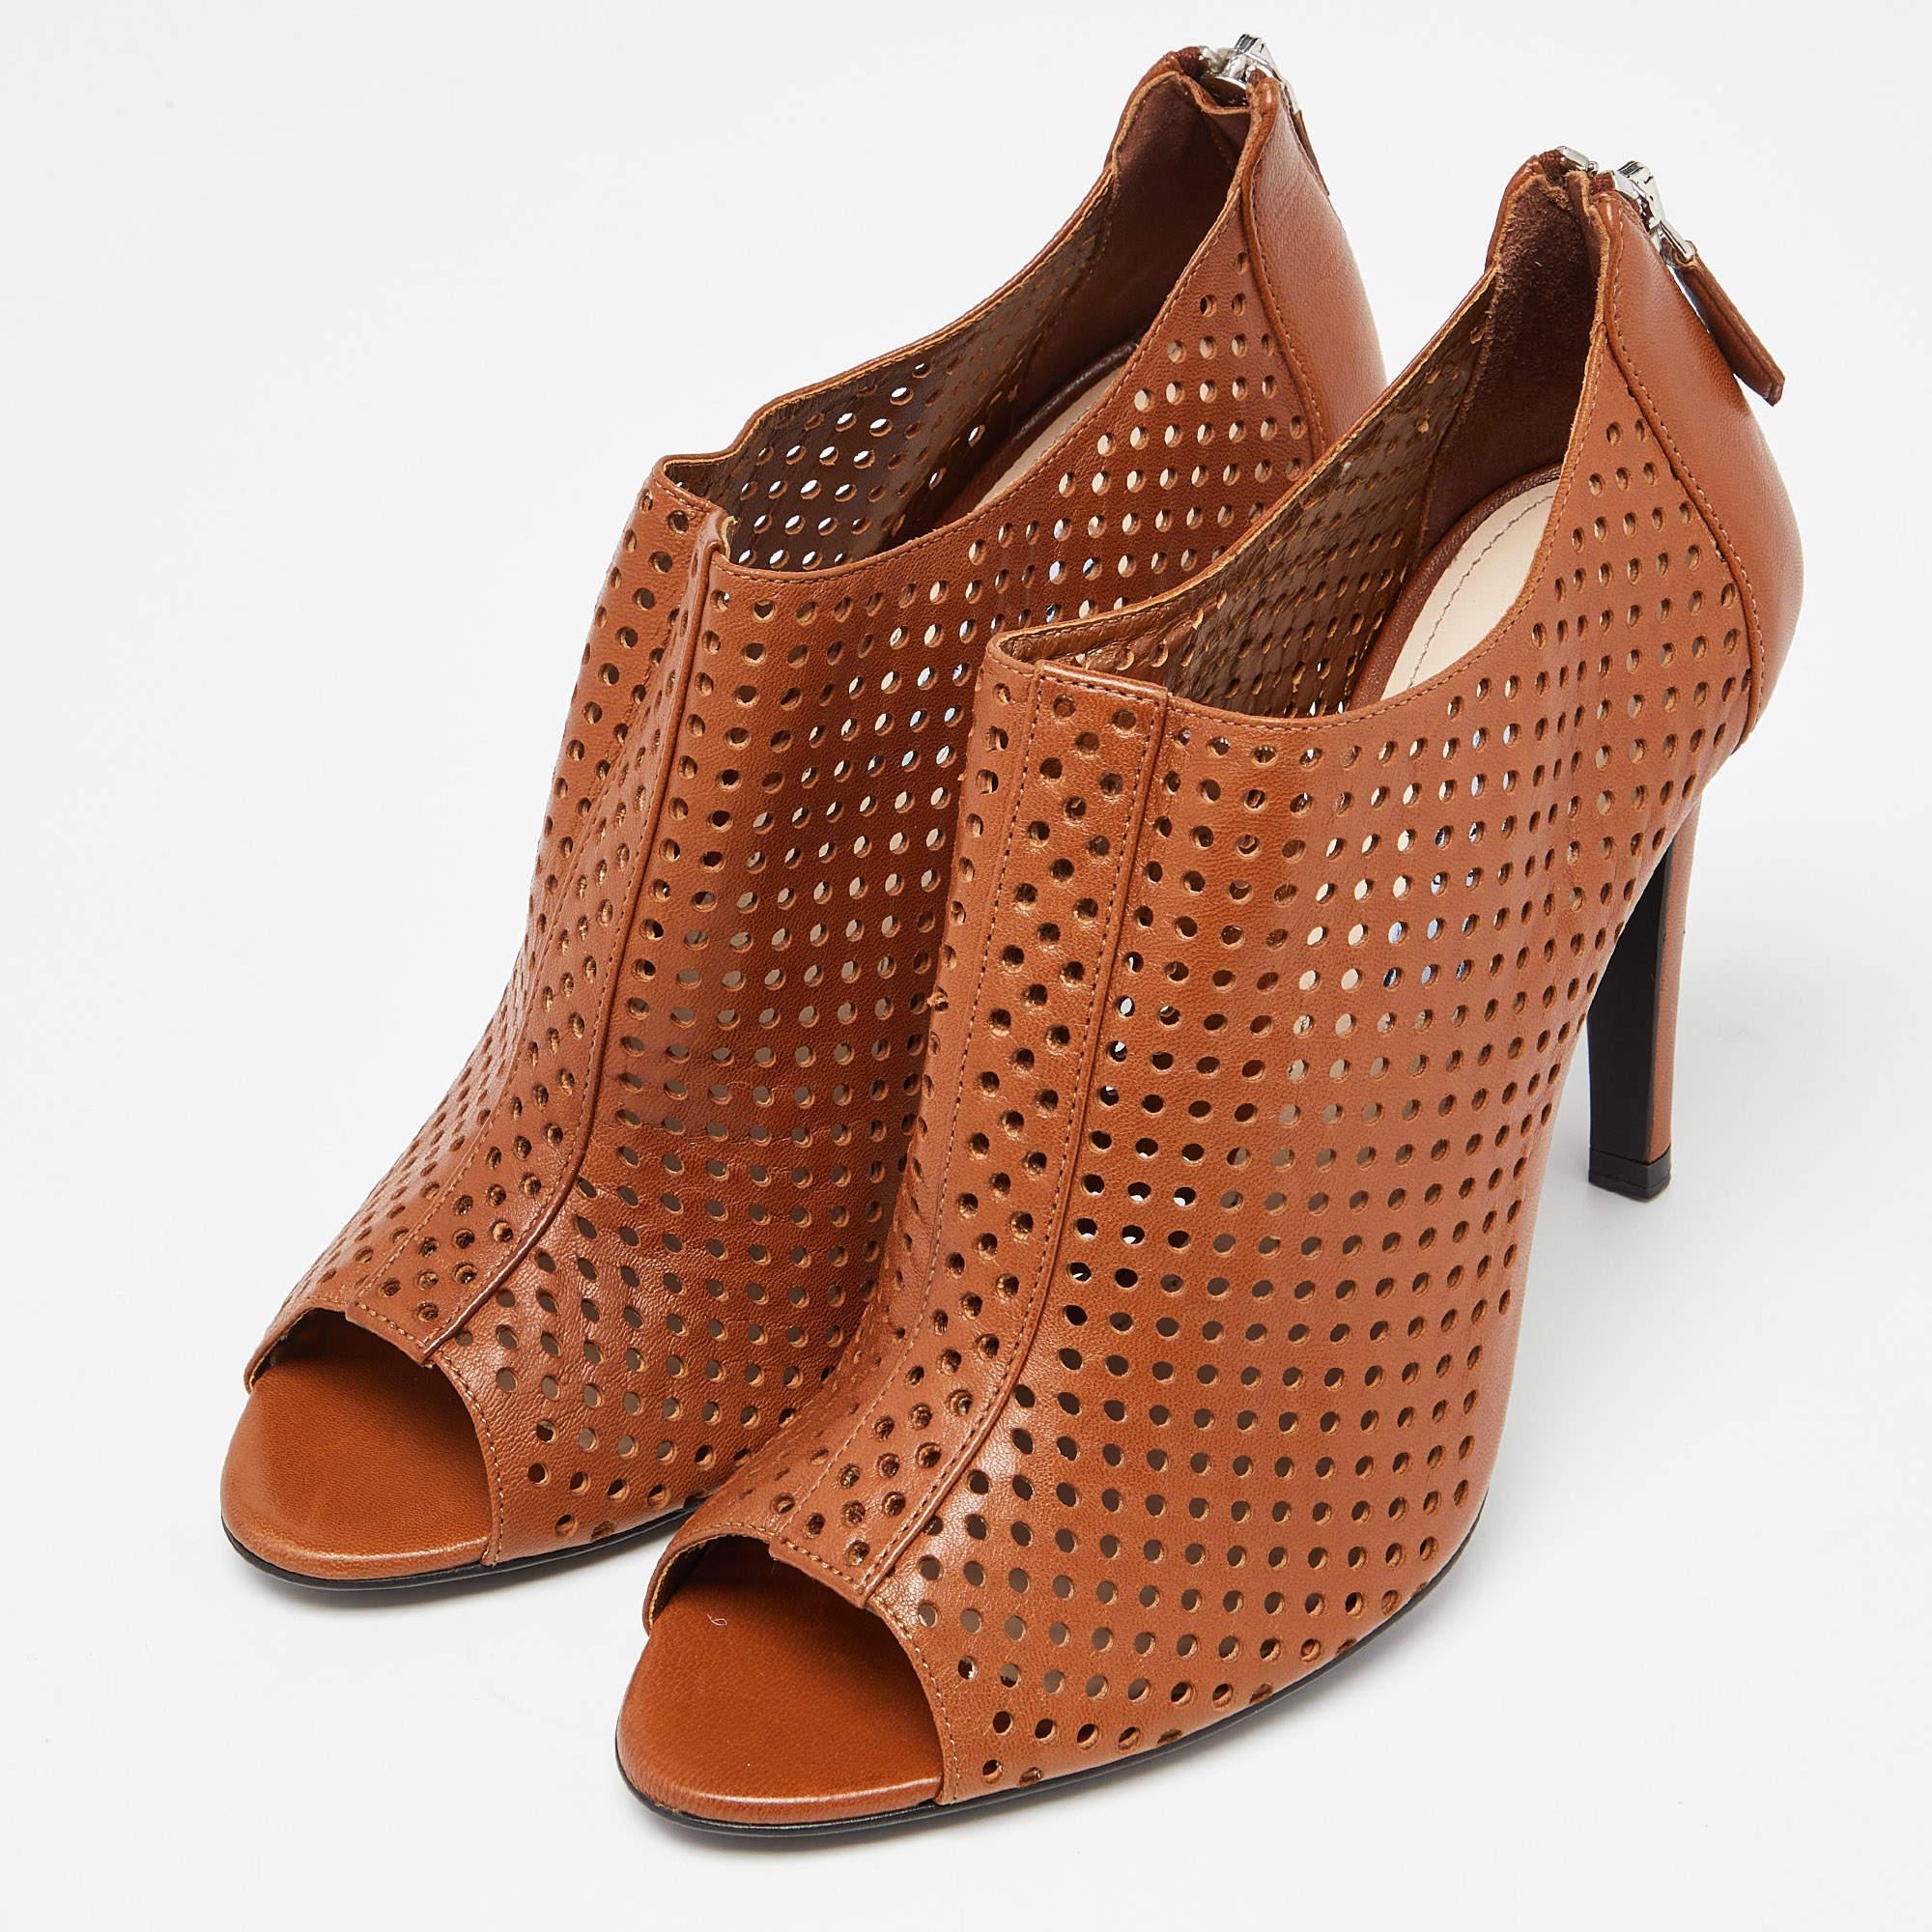 Prada Brown Perforated Leather Peep Toe Ankle Booties Size 39 4